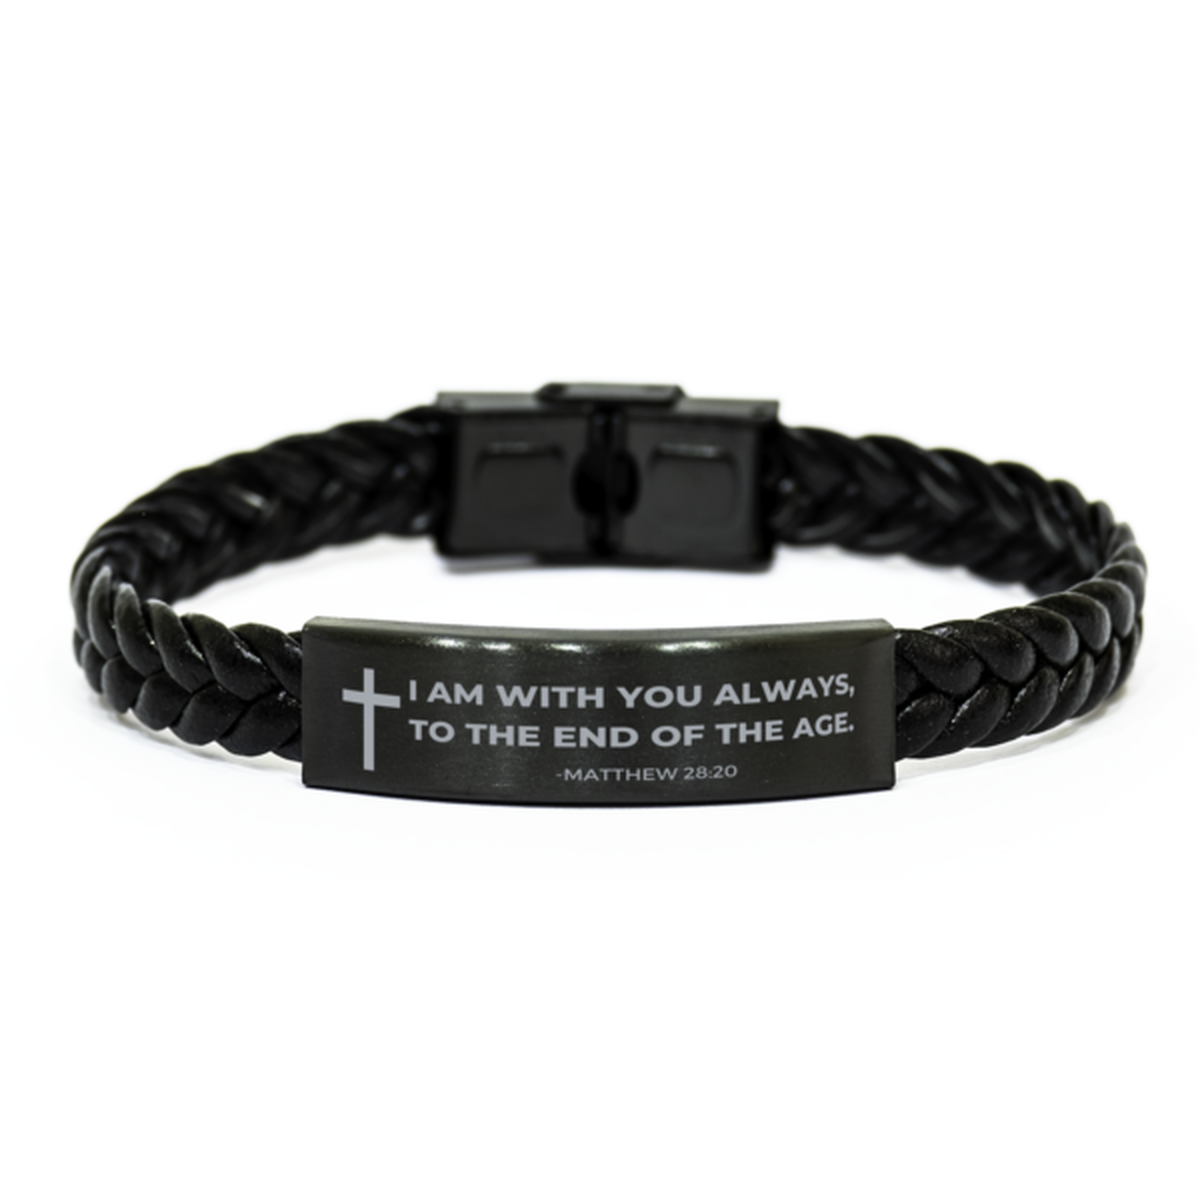 Baptism Gifts For Teenage Boys Girls, Christian Bible Verse Braided Leather Bracelet, I am with you always, Catholic Confirmation Gifts for Son, Godson, Grandson, Nephew